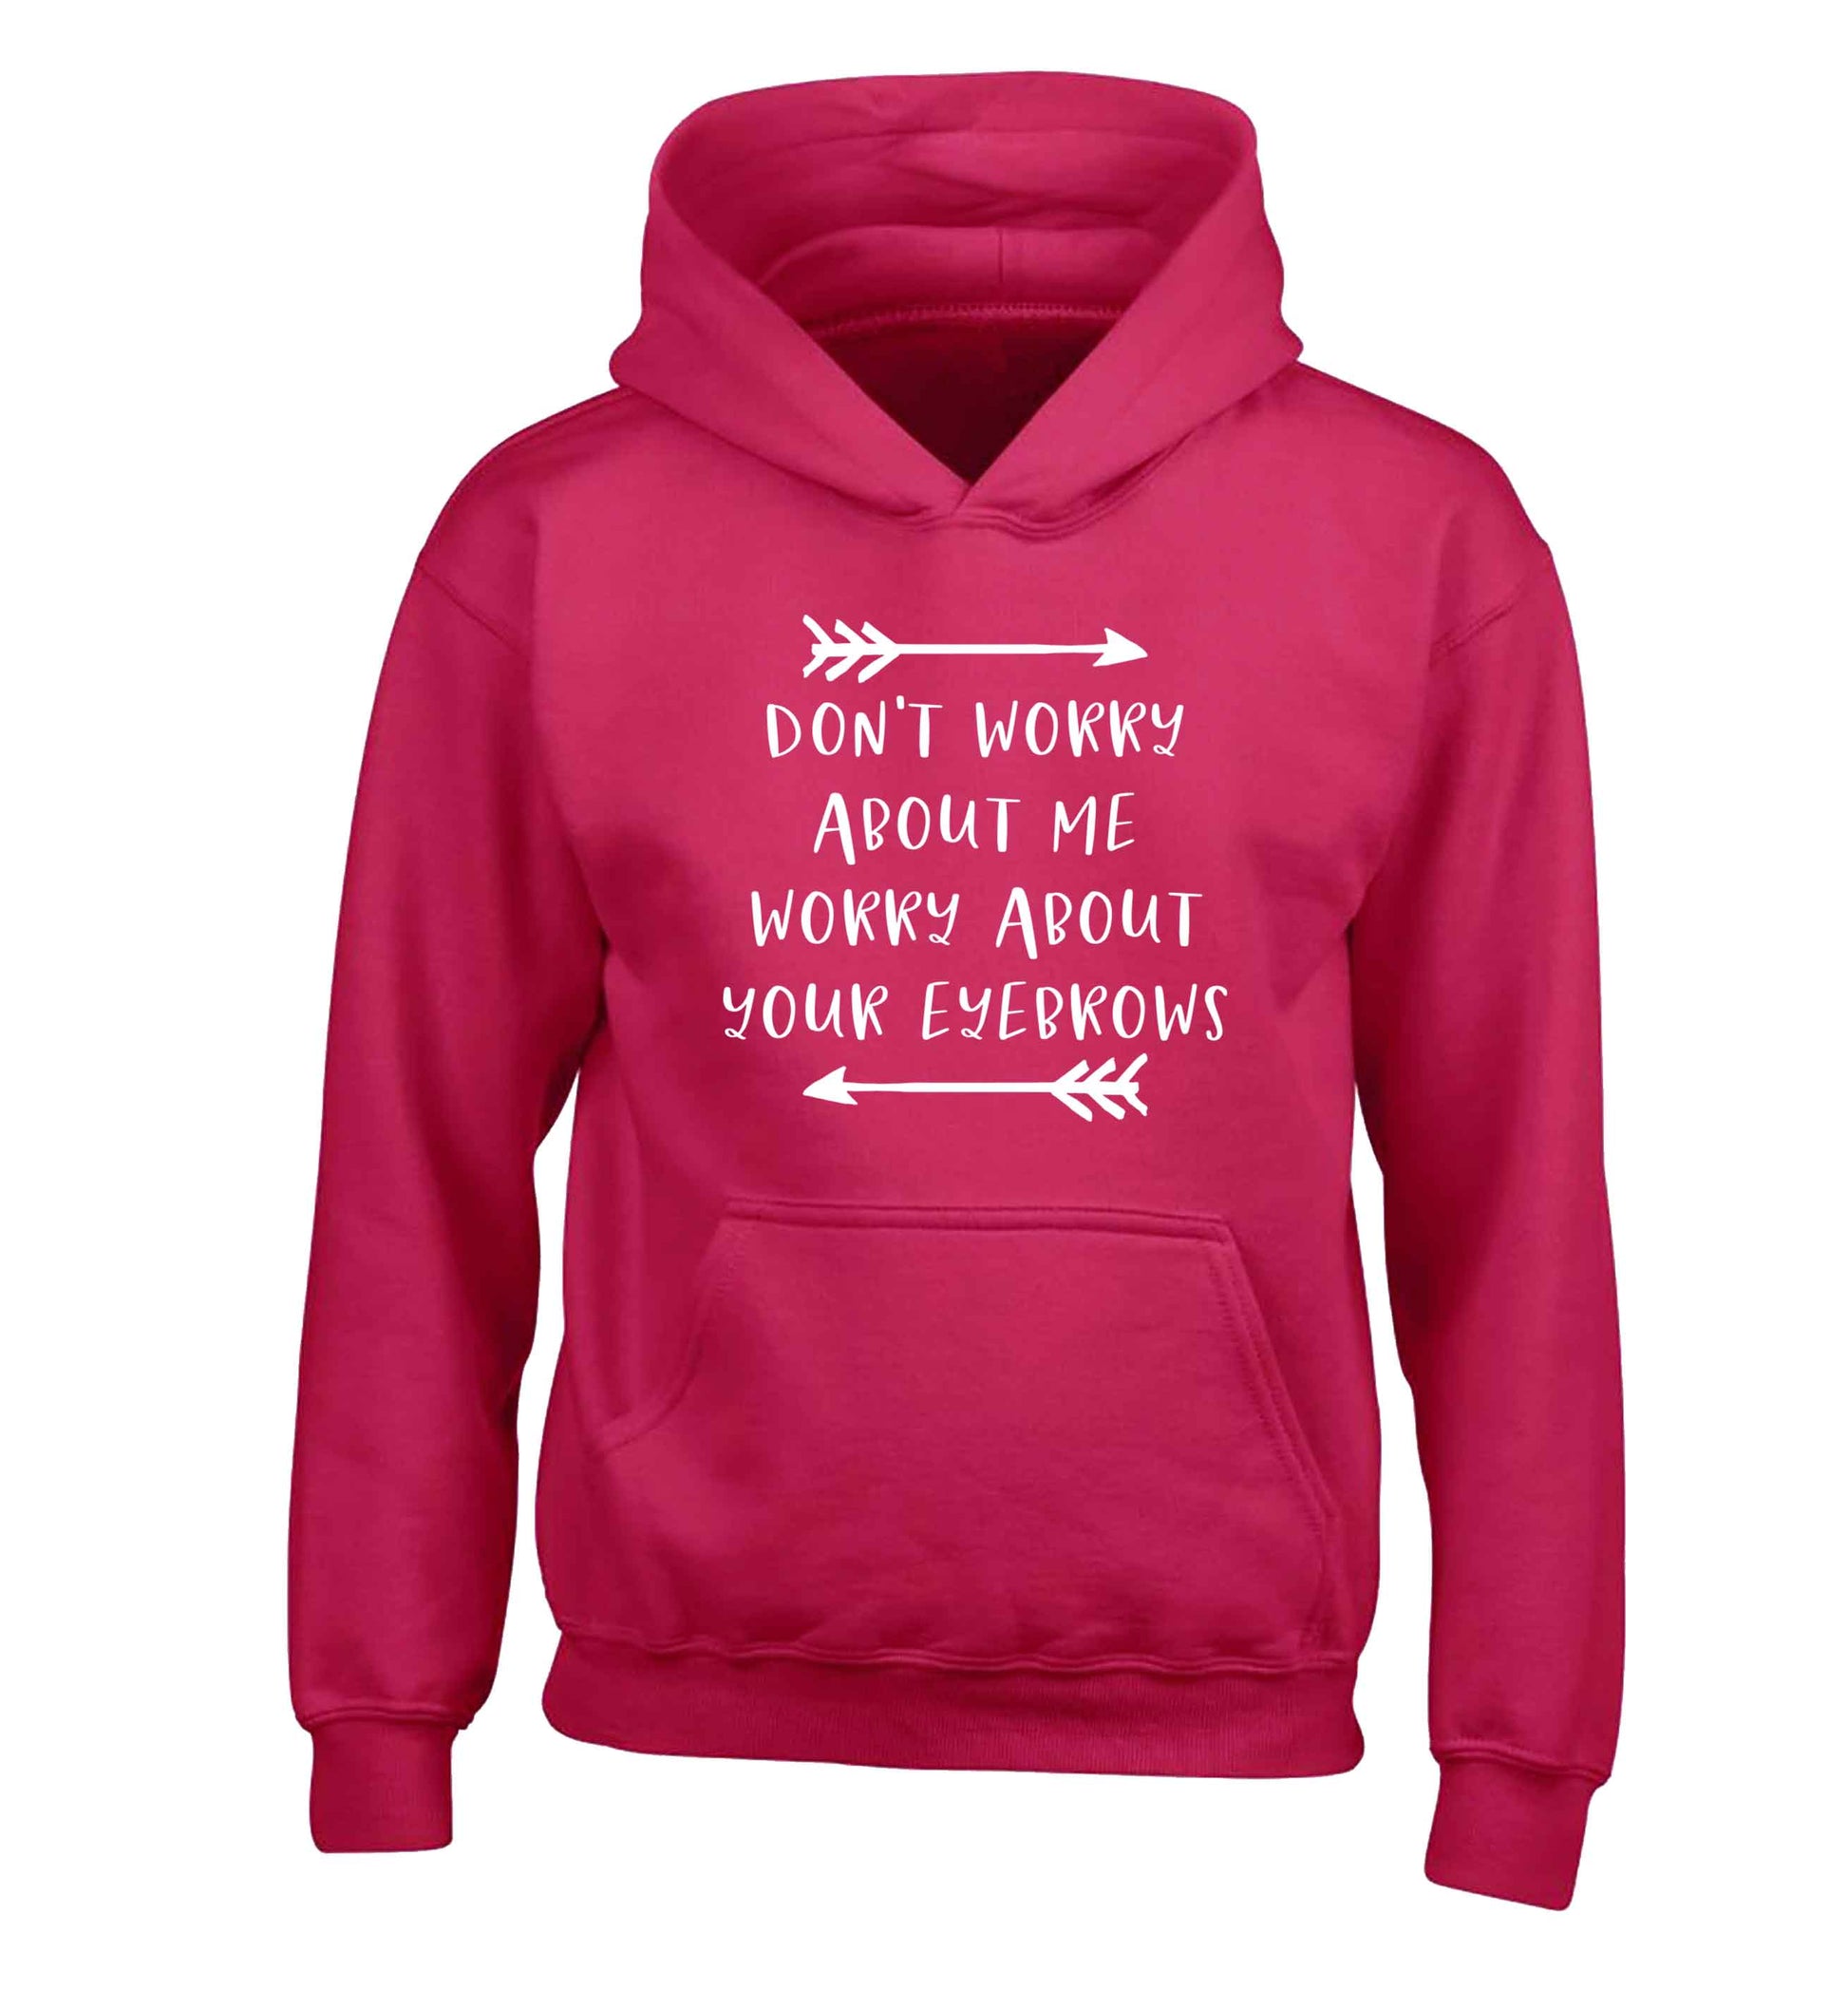 Don't worry about me worry about your eyebrows children's pink hoodie 12-13 Years